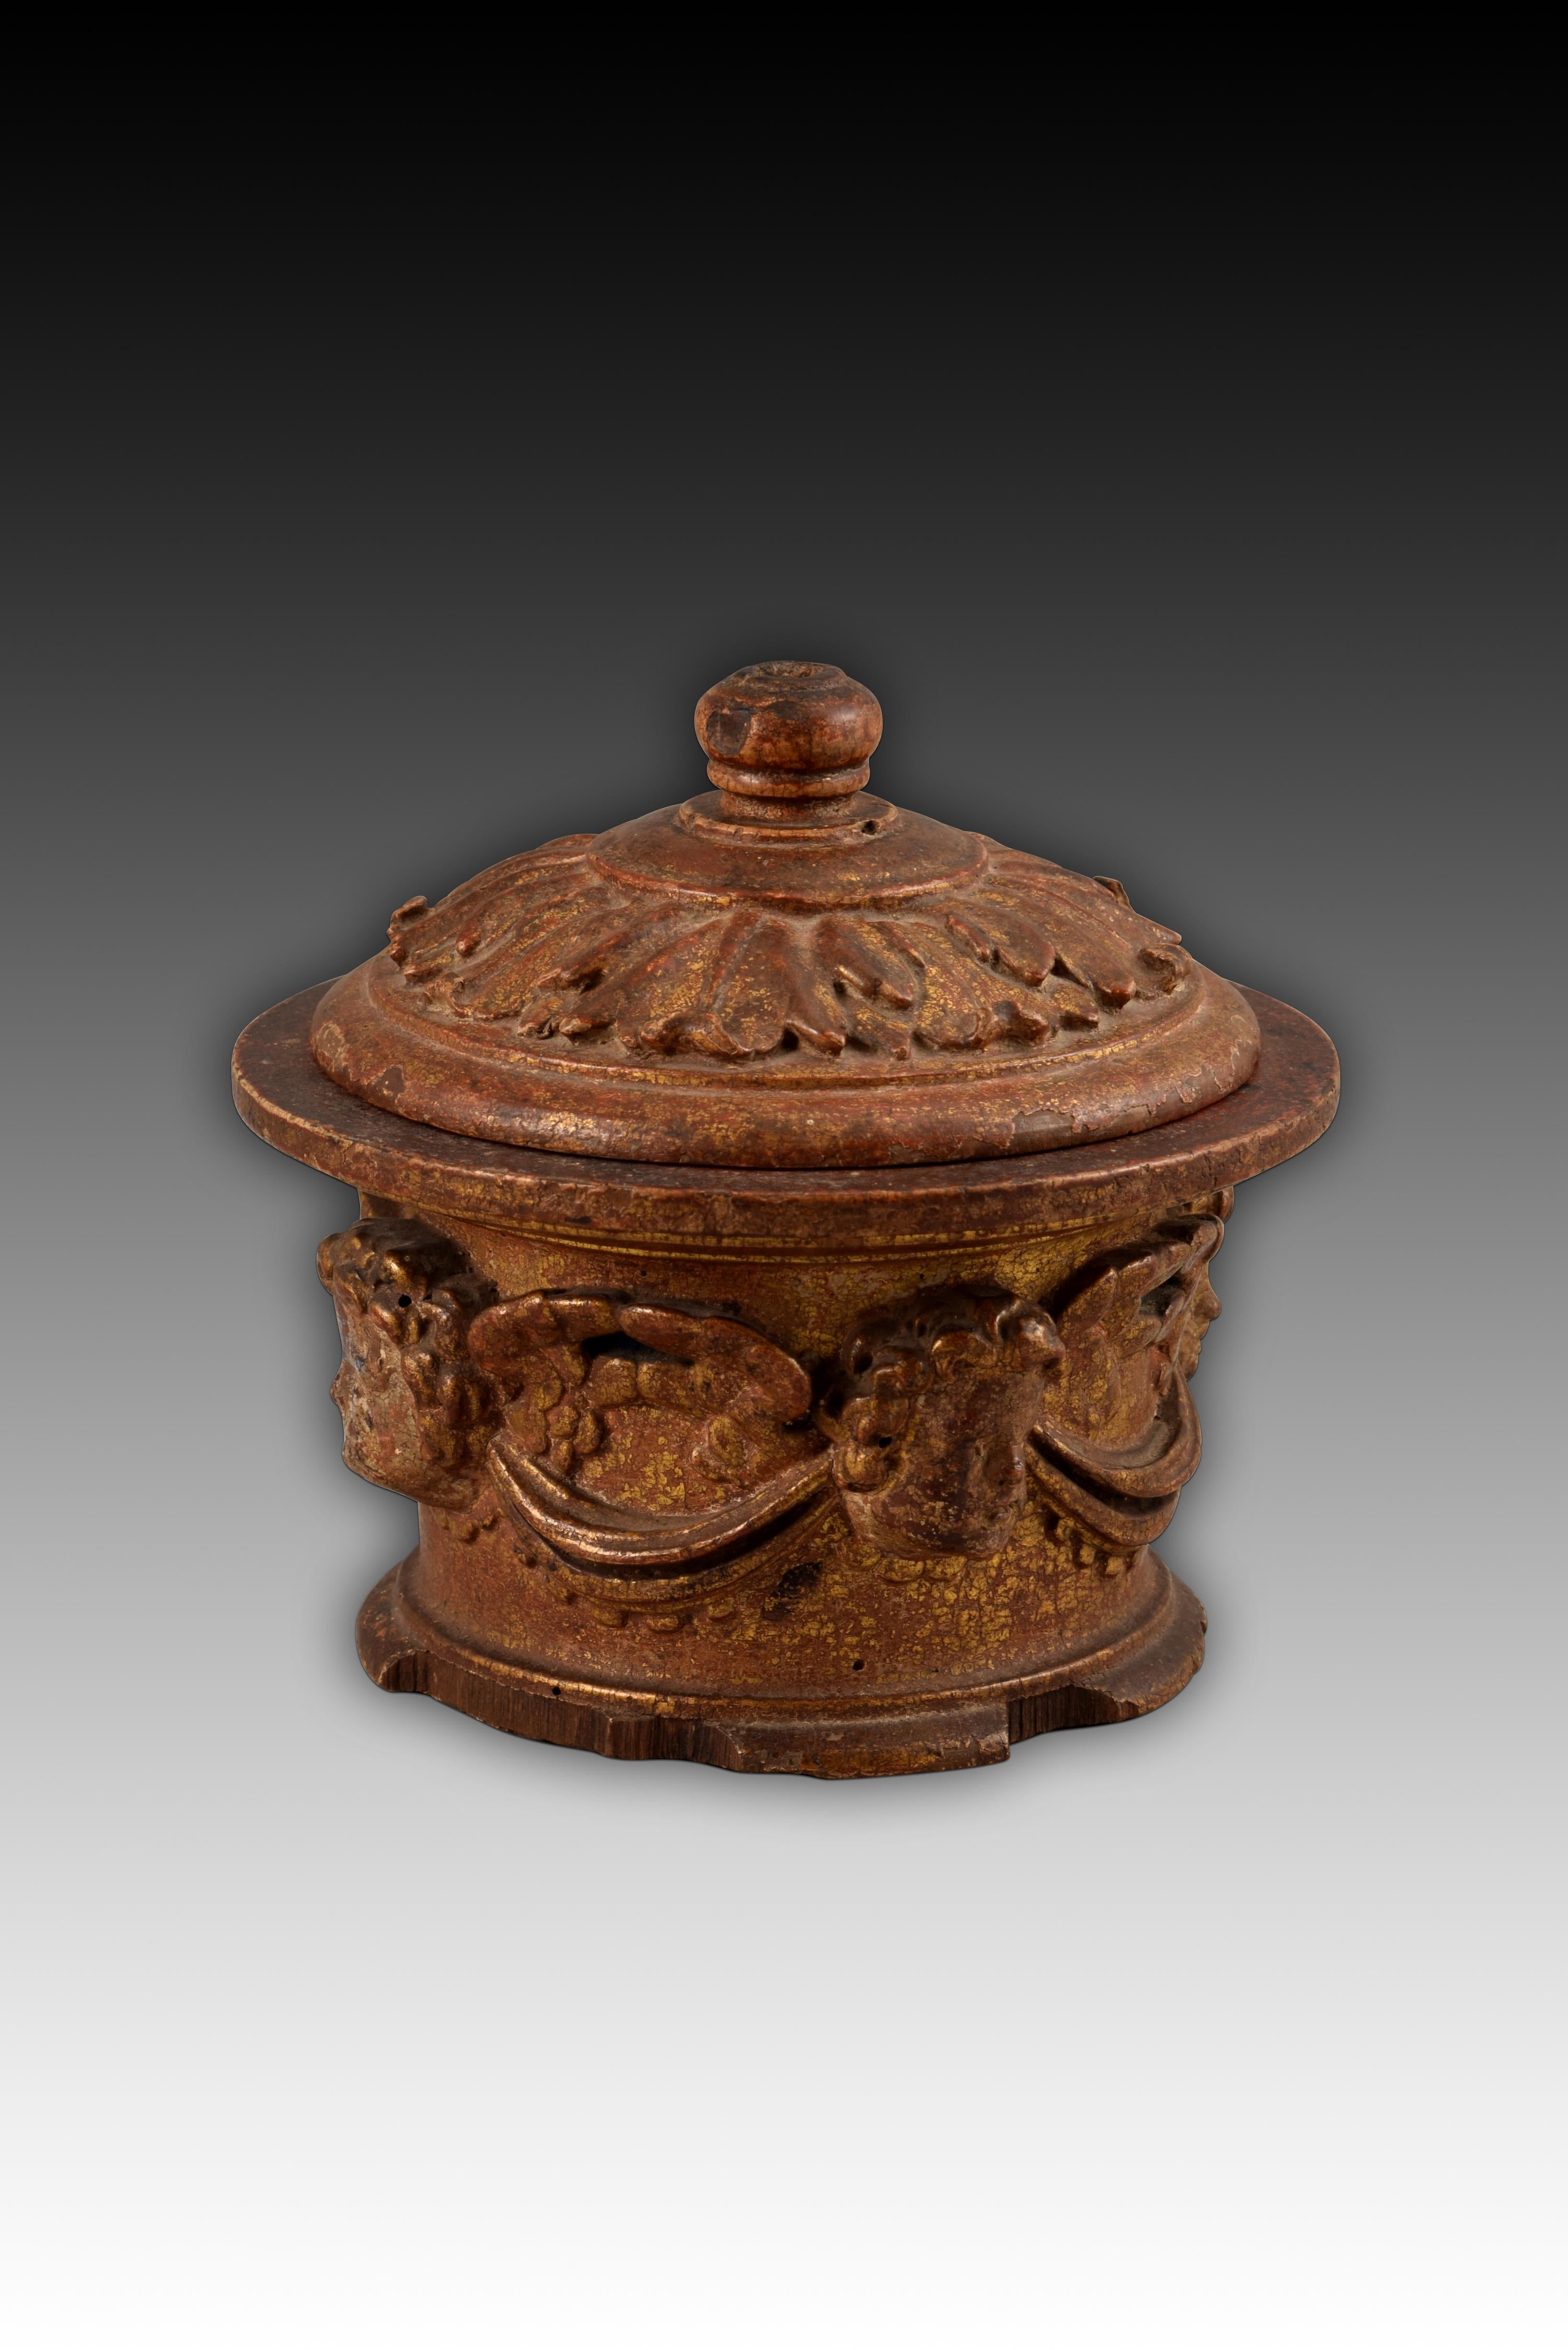 Pyx. Carved and polychrome wood. Spanish school, 16th century. 
Box with a circular base and a frustoconical body that has a vaulted lid topped with a knob with a molding, it is made of carved wood and preserves traces of gilding on its outer